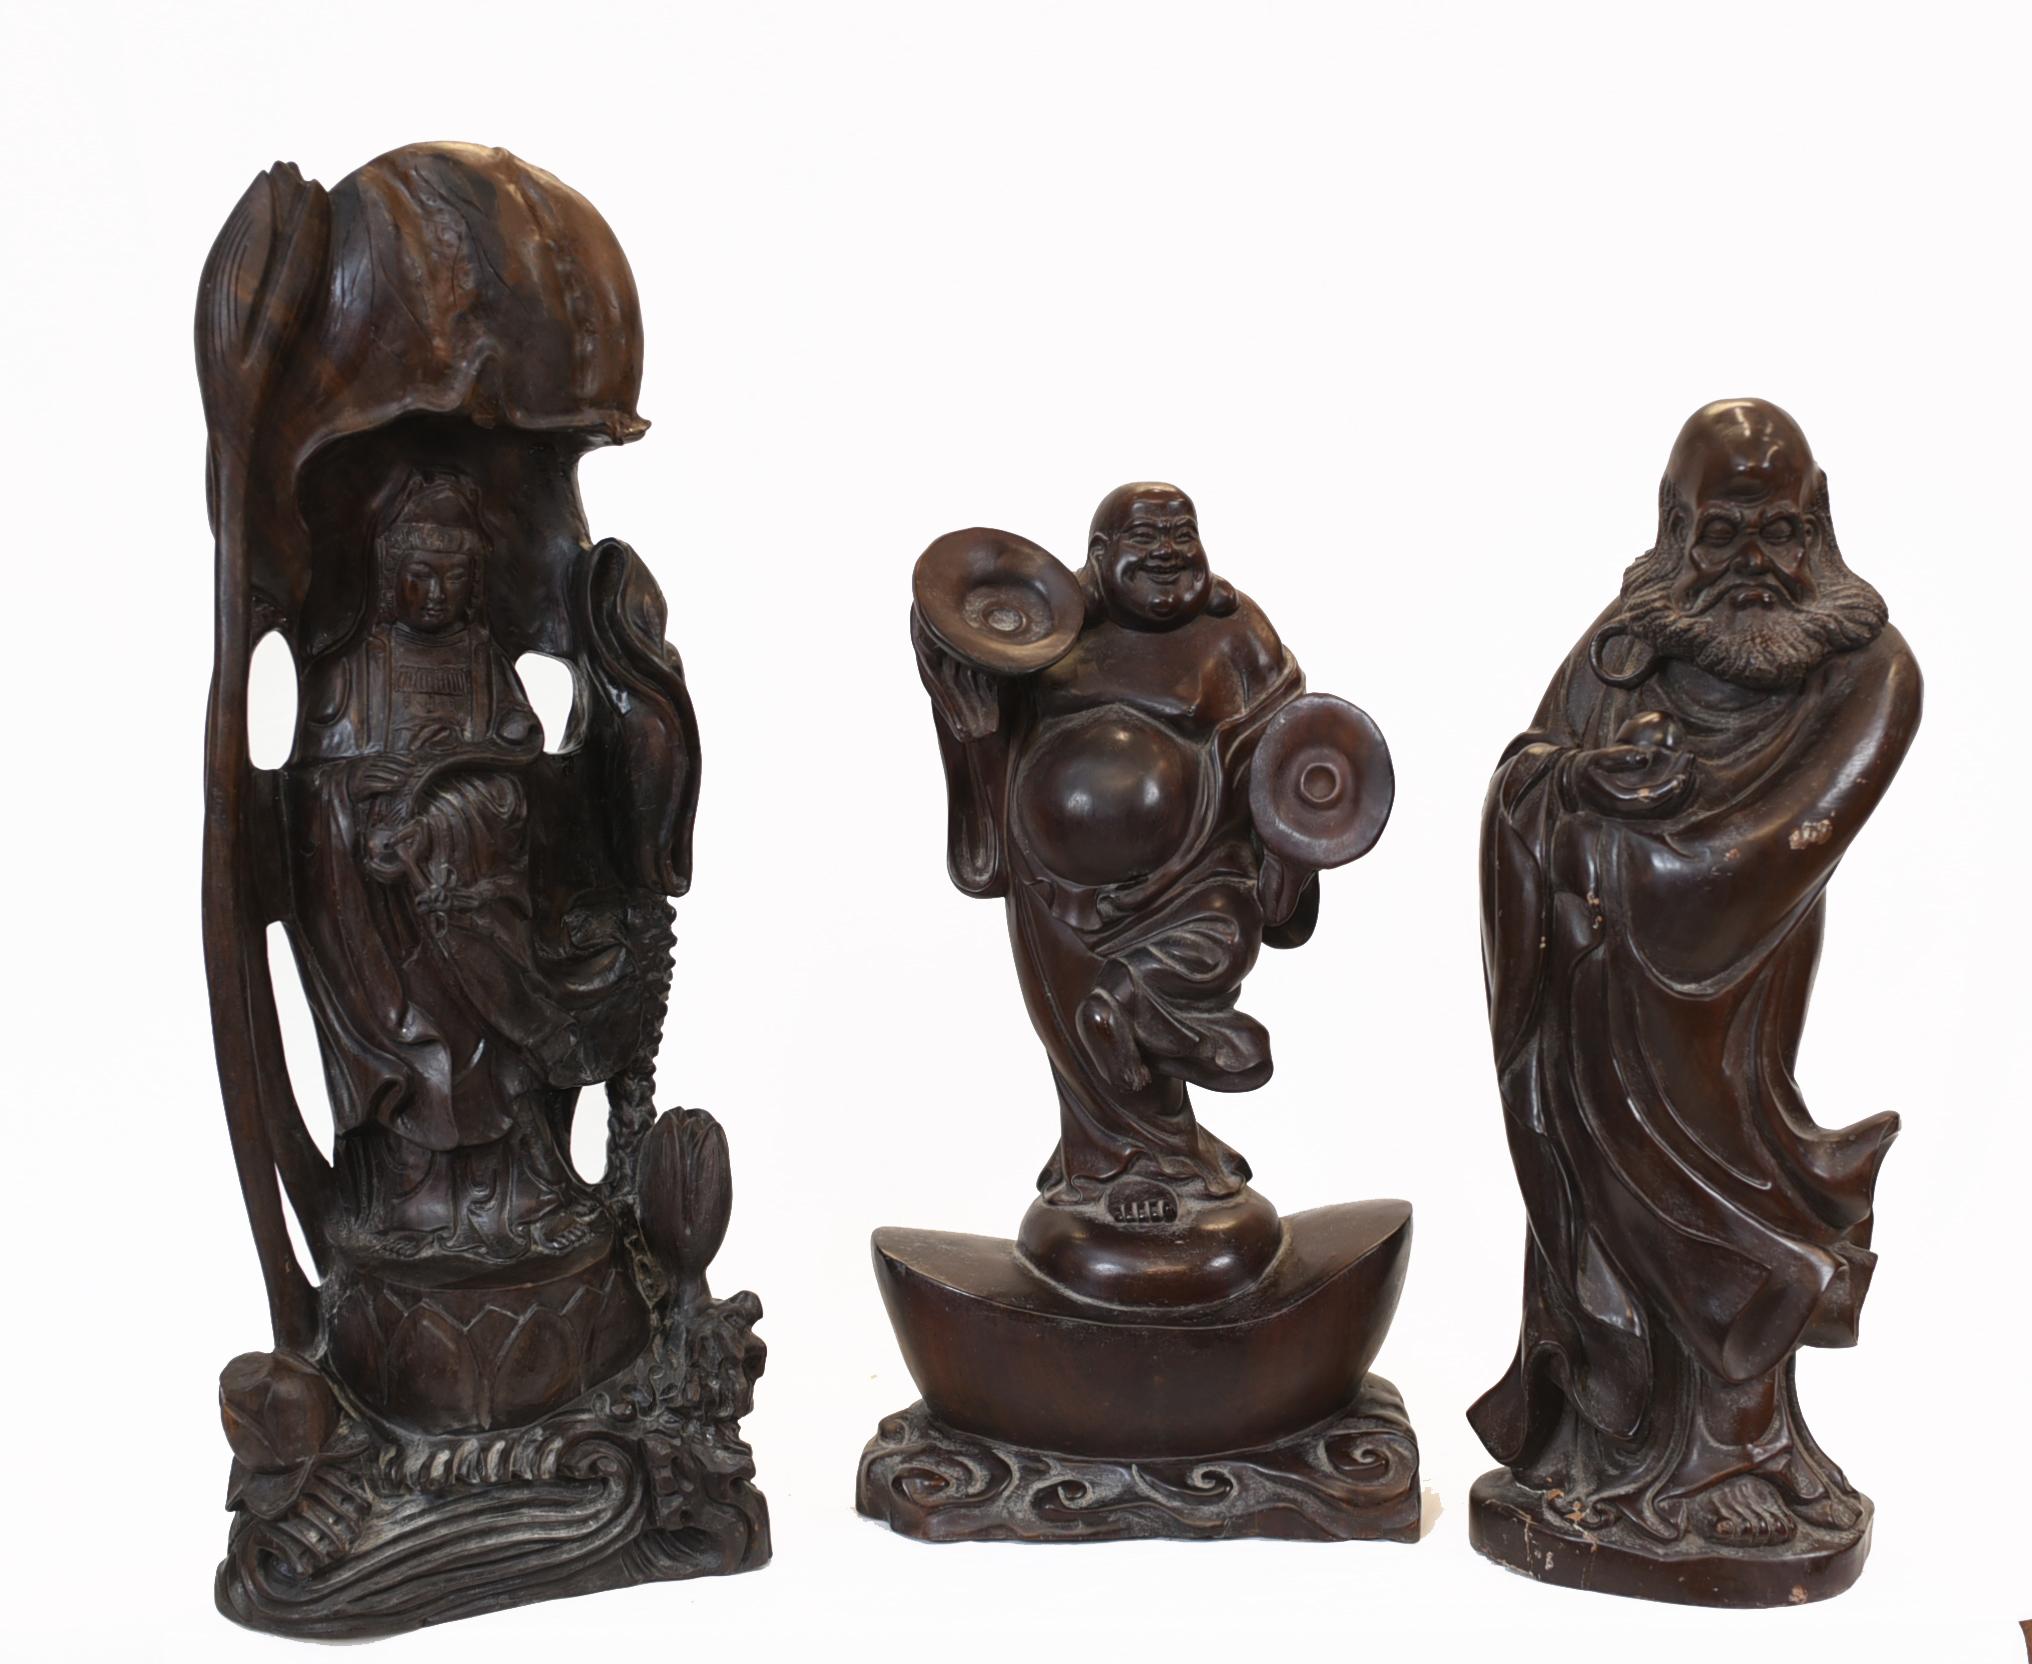 Gorgeous set of three antique carved Chinese figurines
Set of three Buddha characters, including a happy buddha and wise man
Great collectors piece
The detailed to the carving is very intricate
We date these to circa 1930
Viewings available by